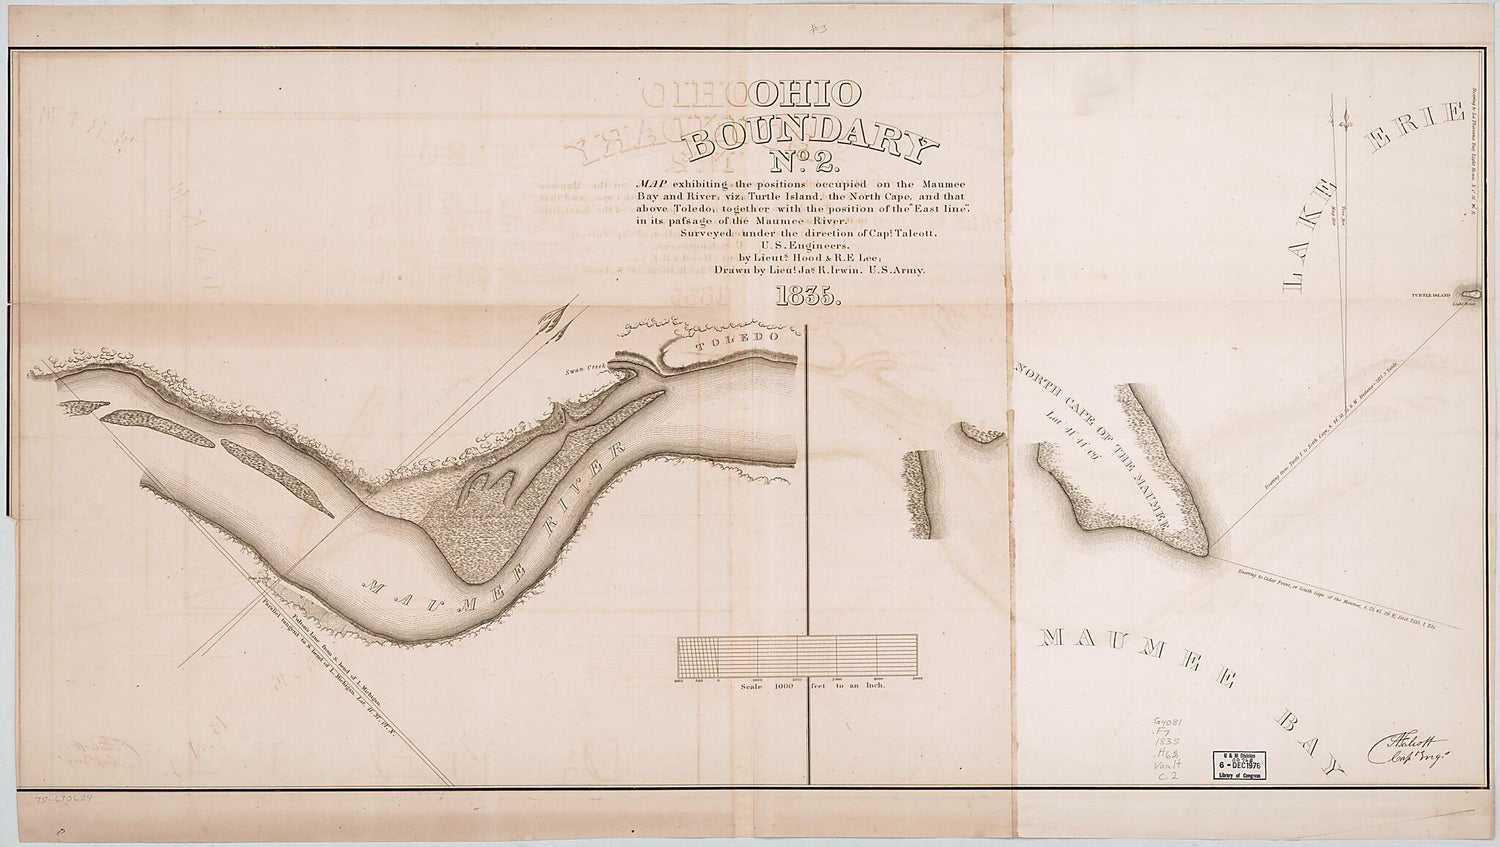 This old map of Ohio Boundary, No. 2. Map Exhibiting the Positions Occupied On the Maumee Bay and River; Viz: Turtle Island, the North Cape, and That Above Toledo; Together With the Position of the East Line, In Its Passage of the Maumee River from 1835 